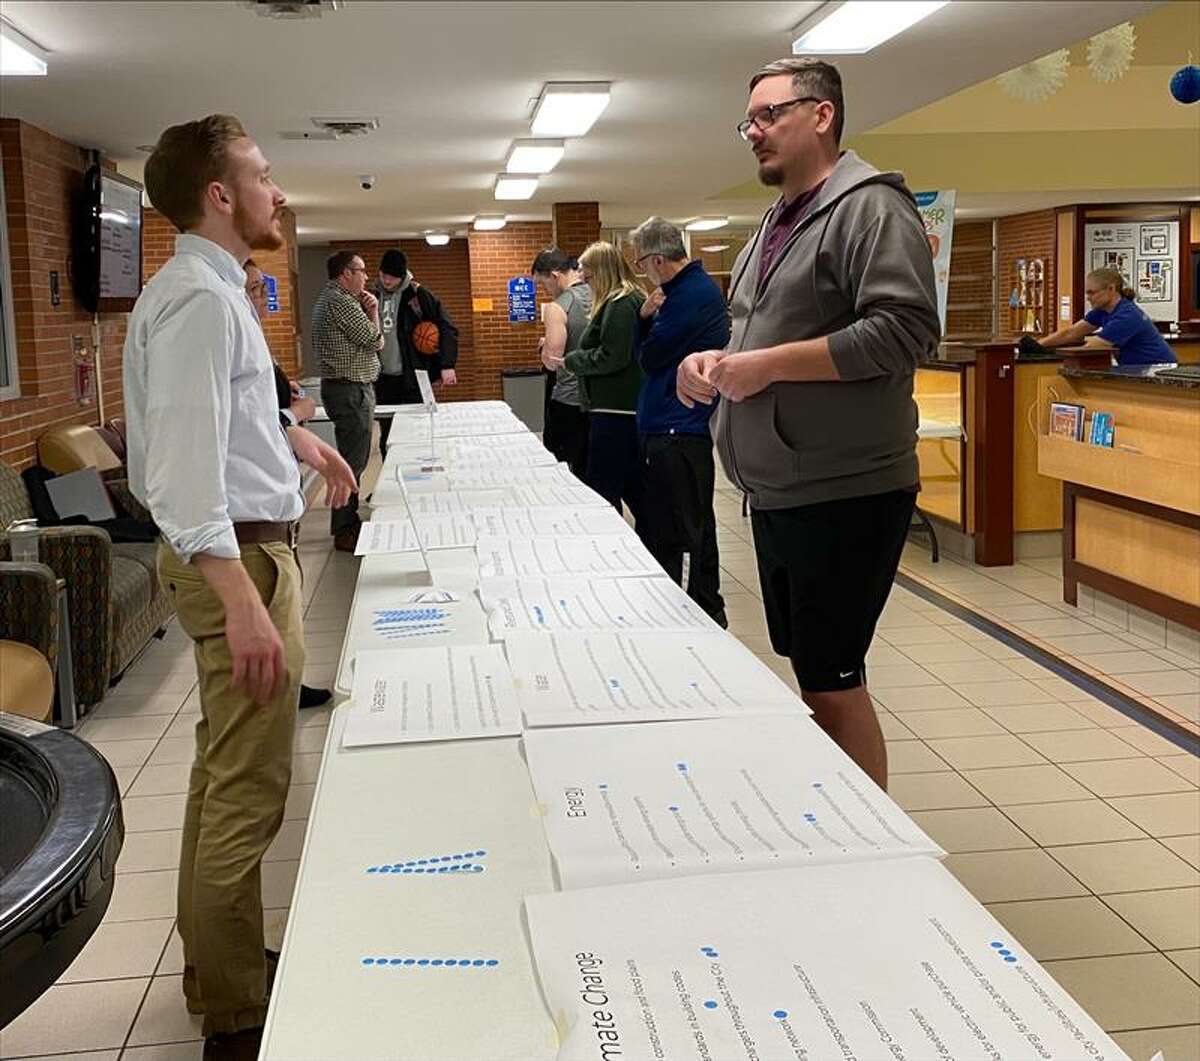 The Planning Commission hosted an open house at Greater Midland Community Center for its Master Plan to prioritize ideas from community members.